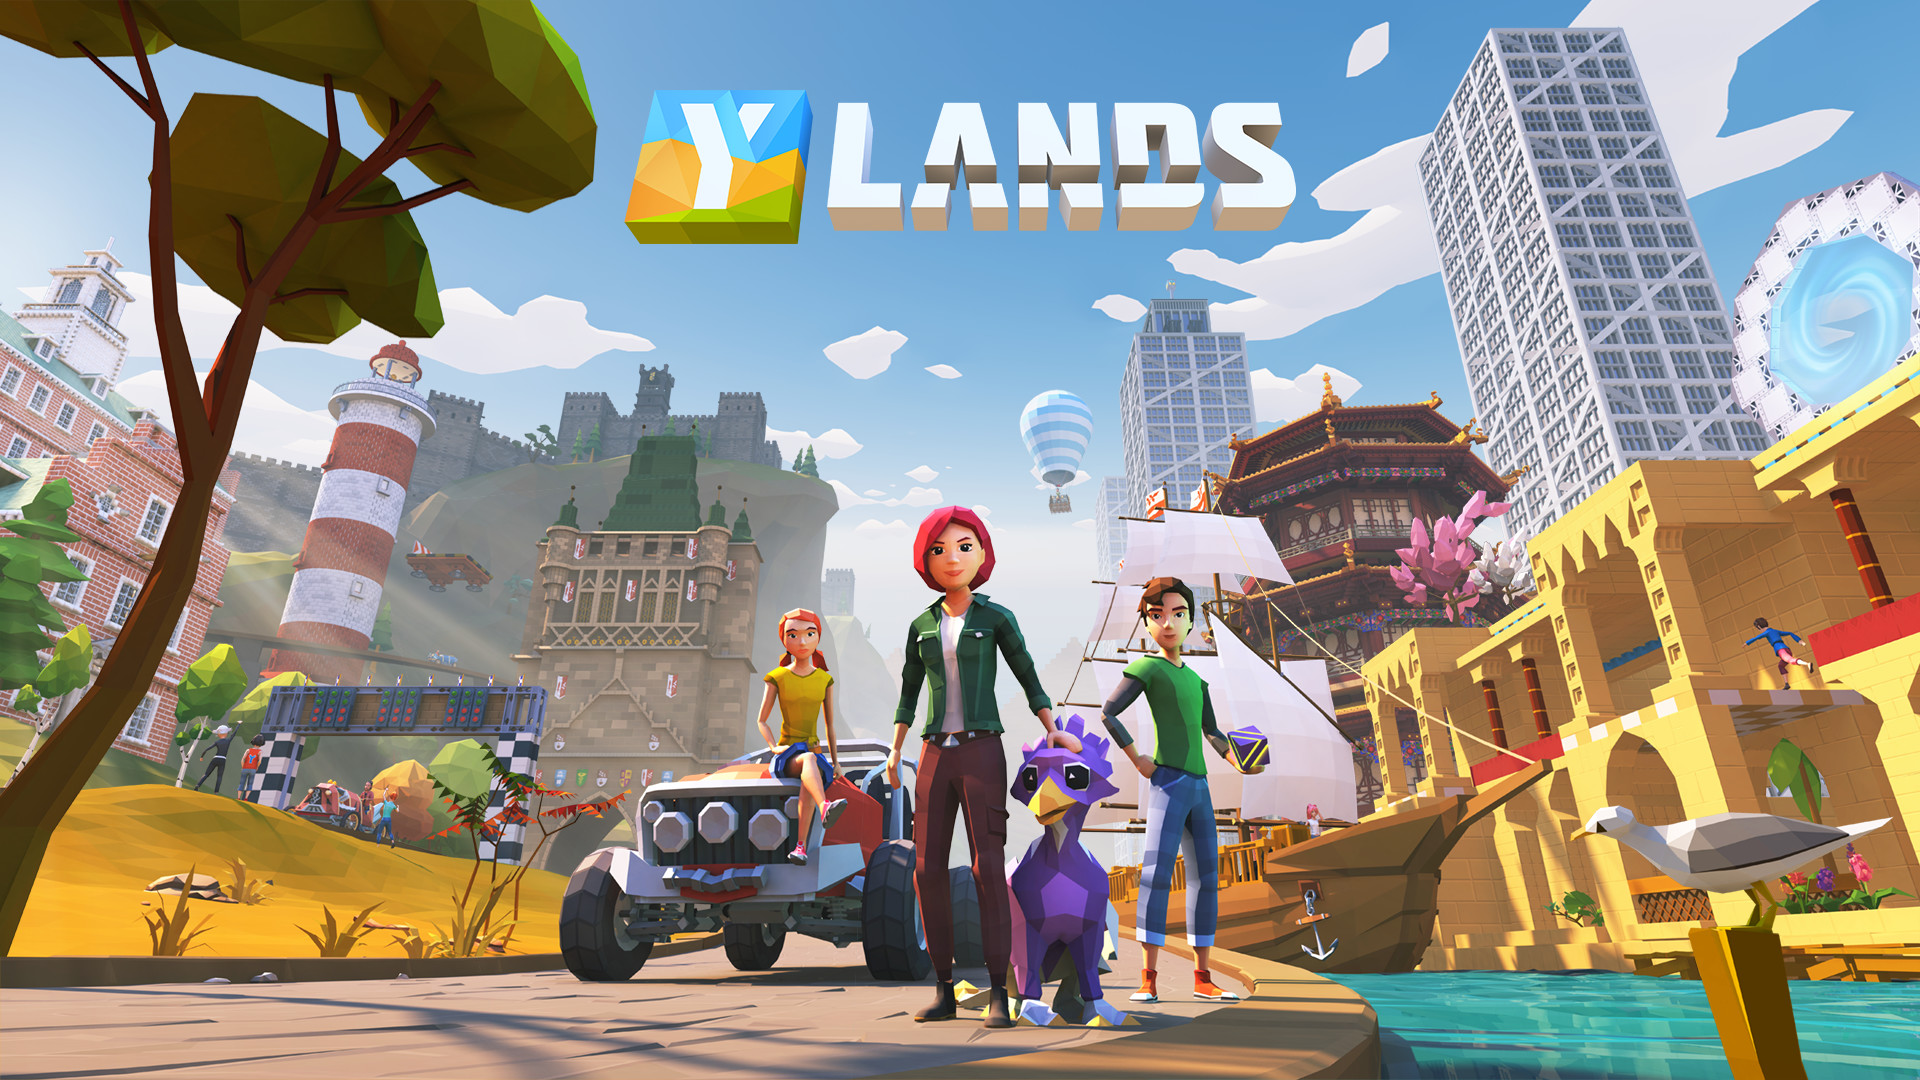 Ylands download the last version for iphone